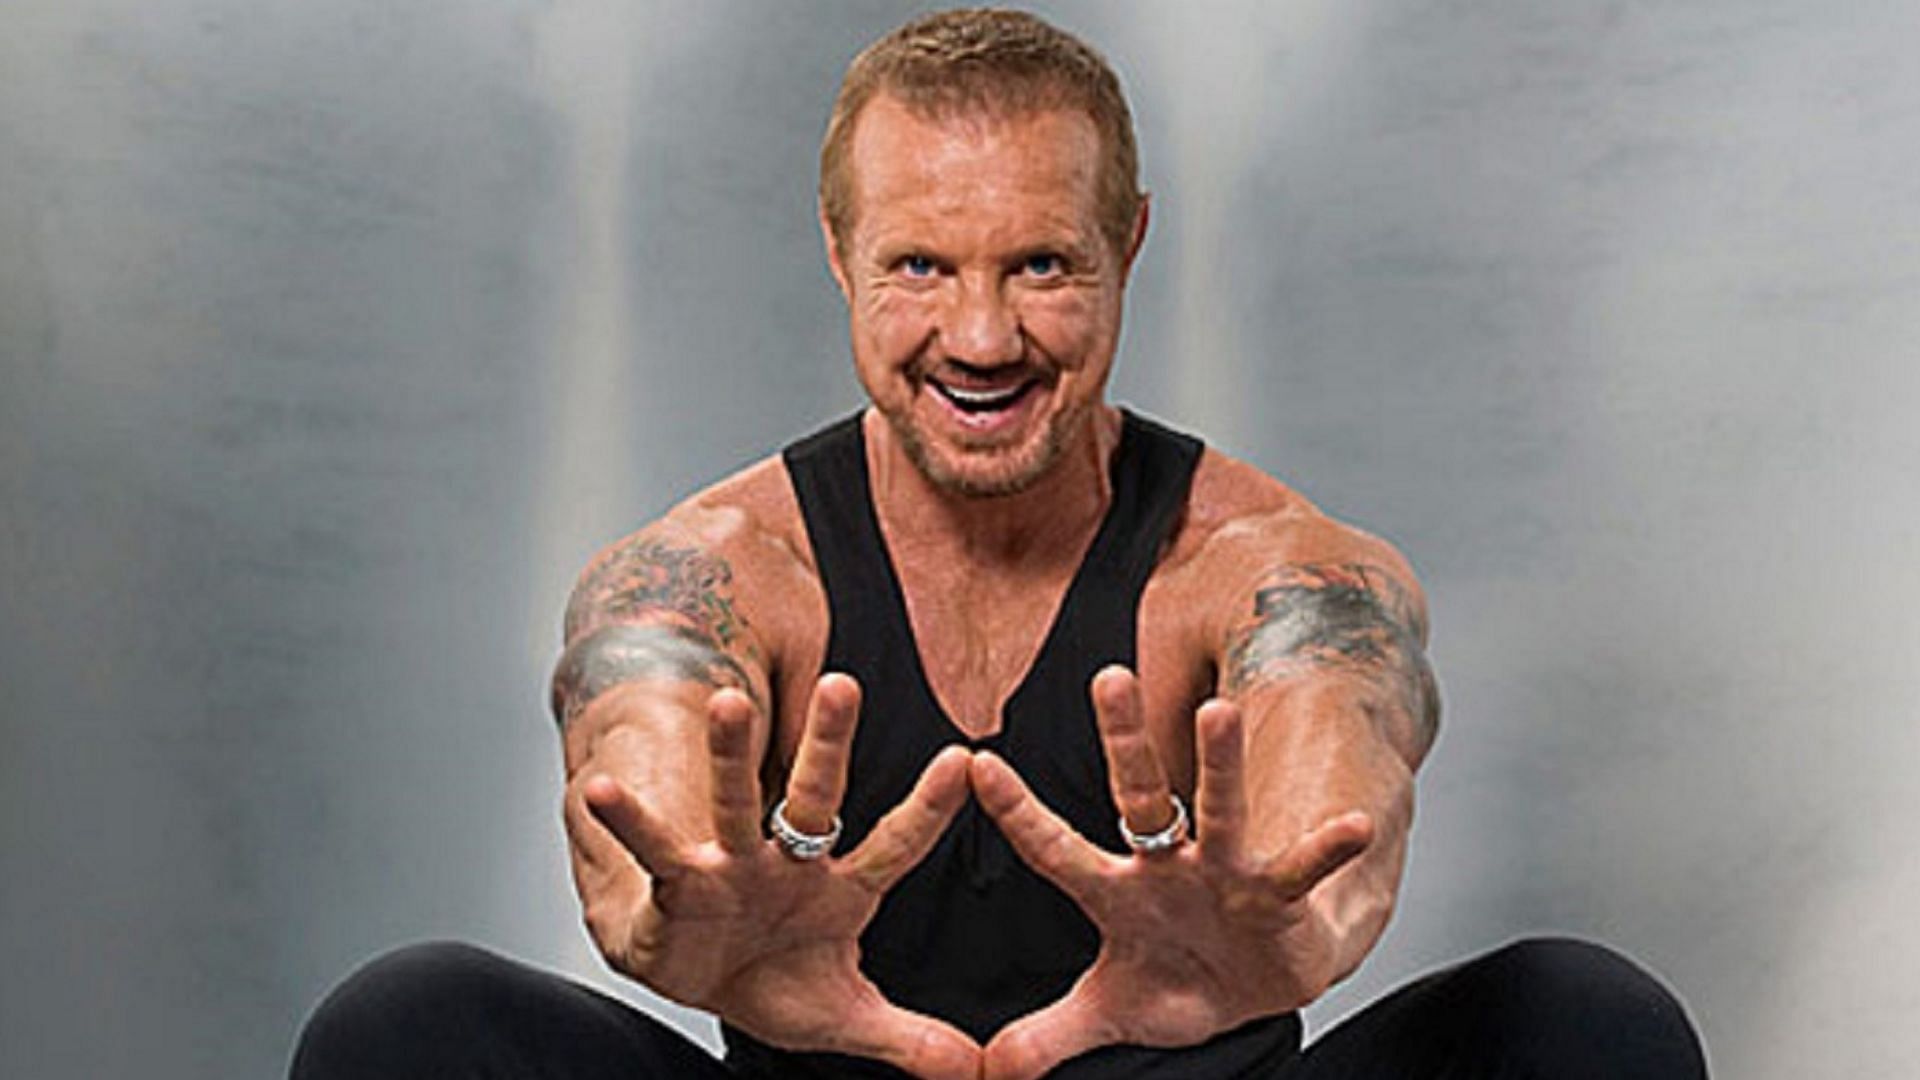 DDP Yoga has helped several wrestlers maintain a healthy lifestyle